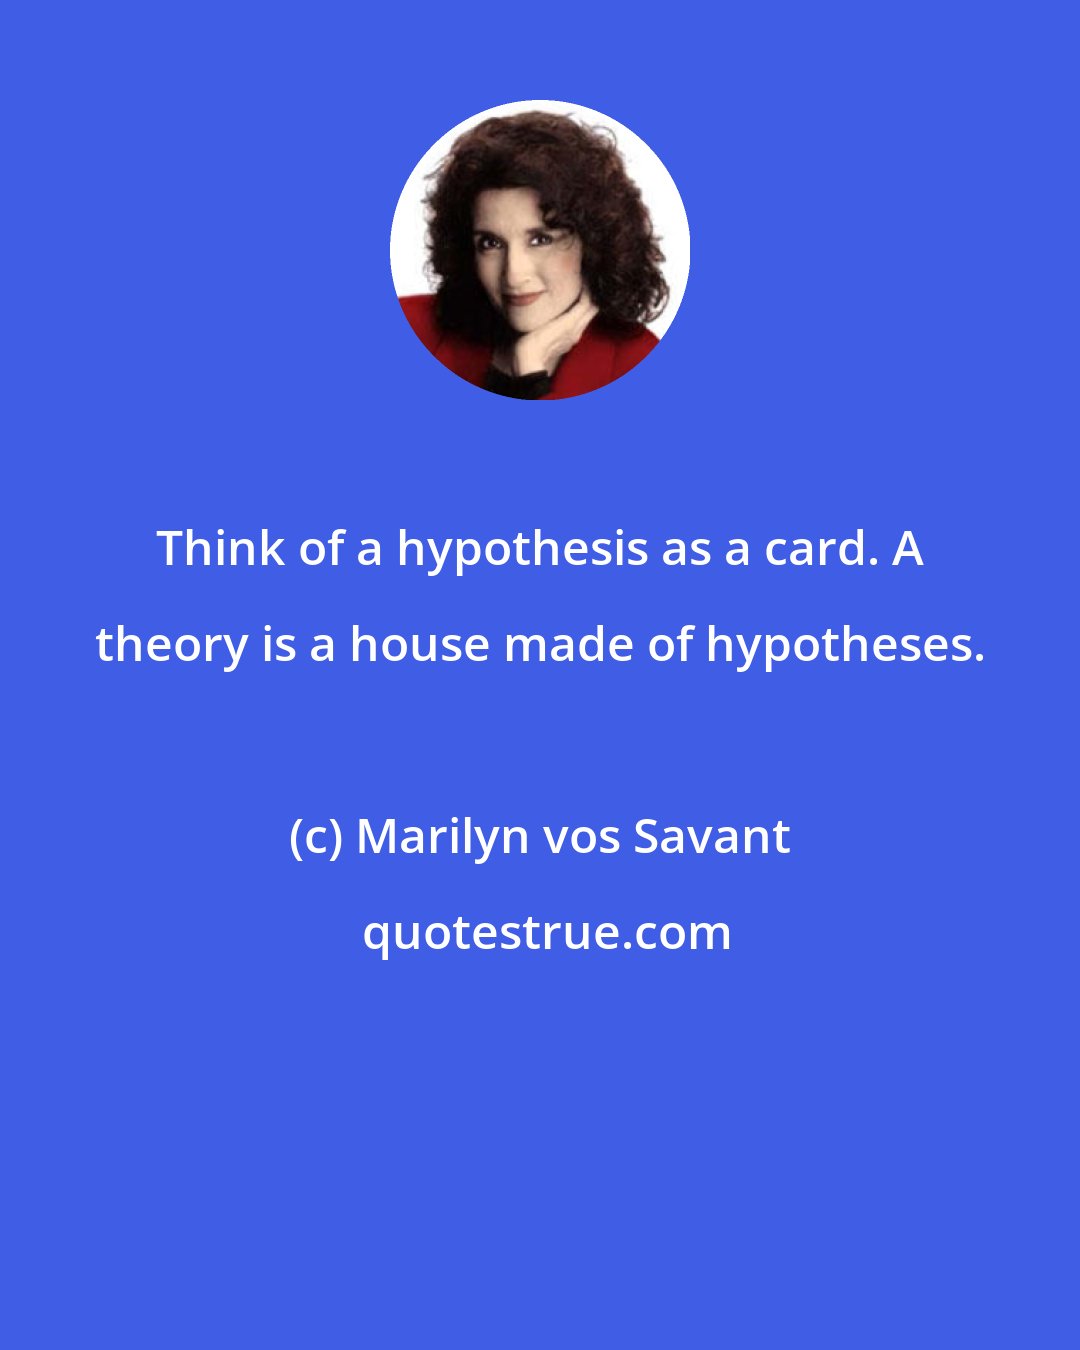 Marilyn vos Savant: Think of a hypothesis as a card. A theory is a house made of hypotheses.